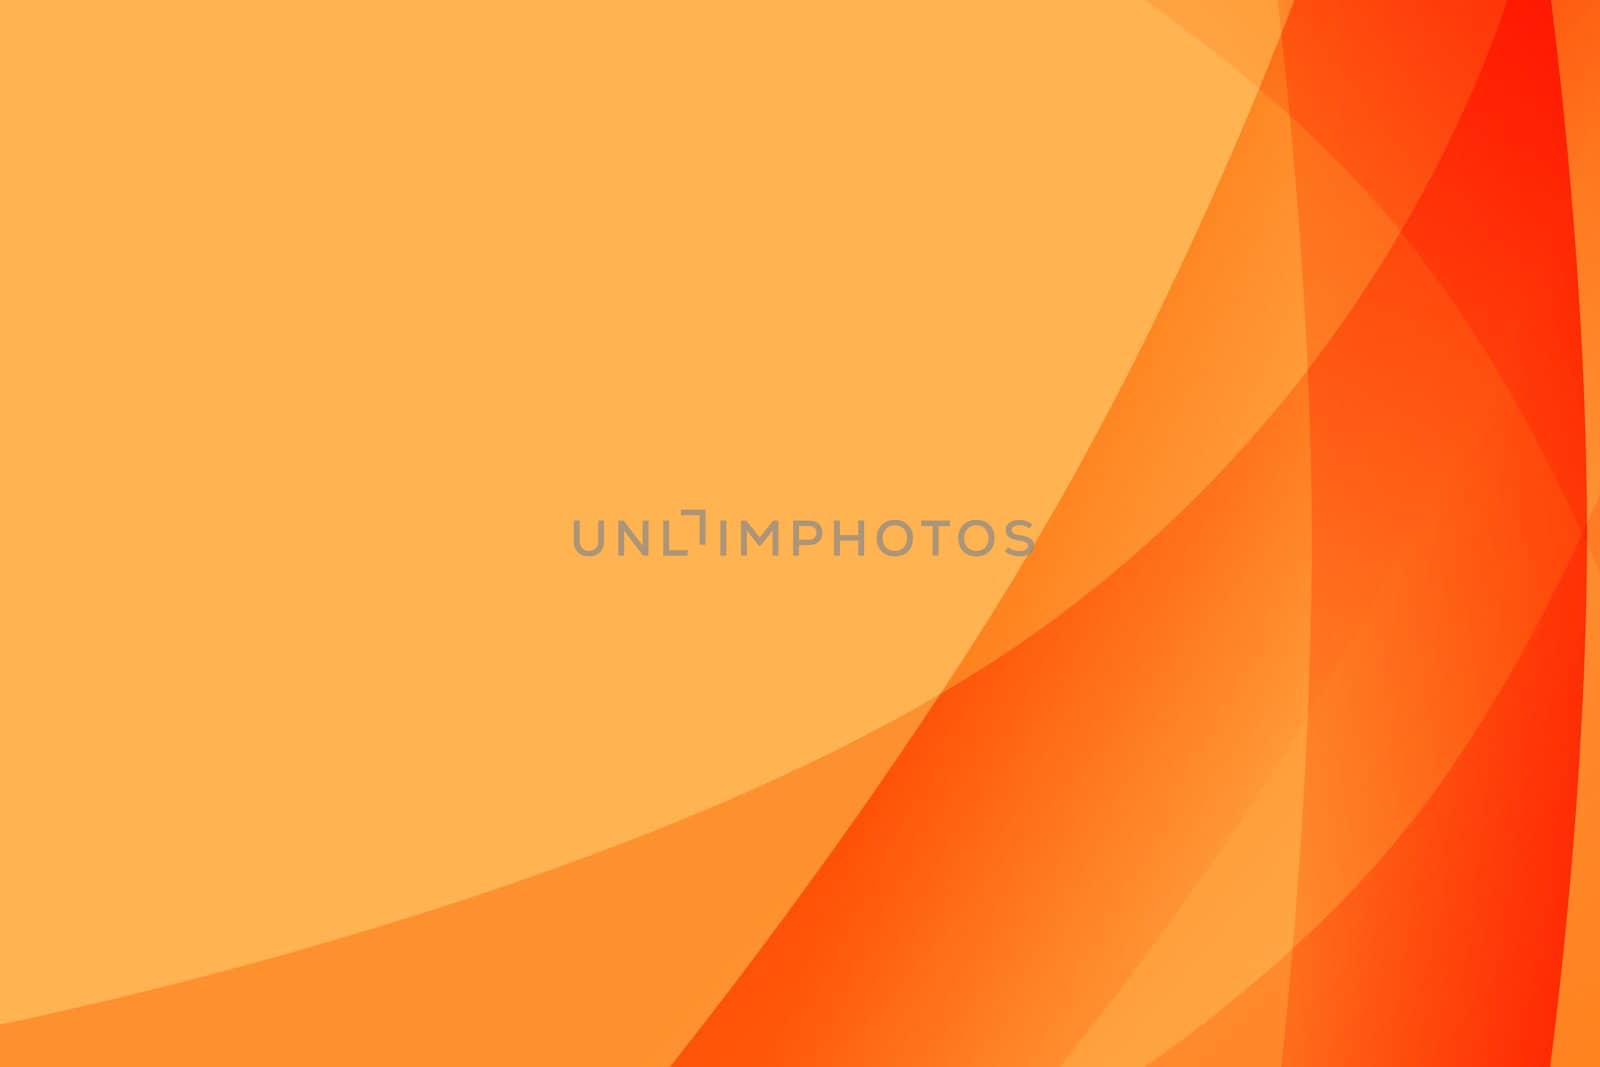 Background with different shades of orange on the right site.